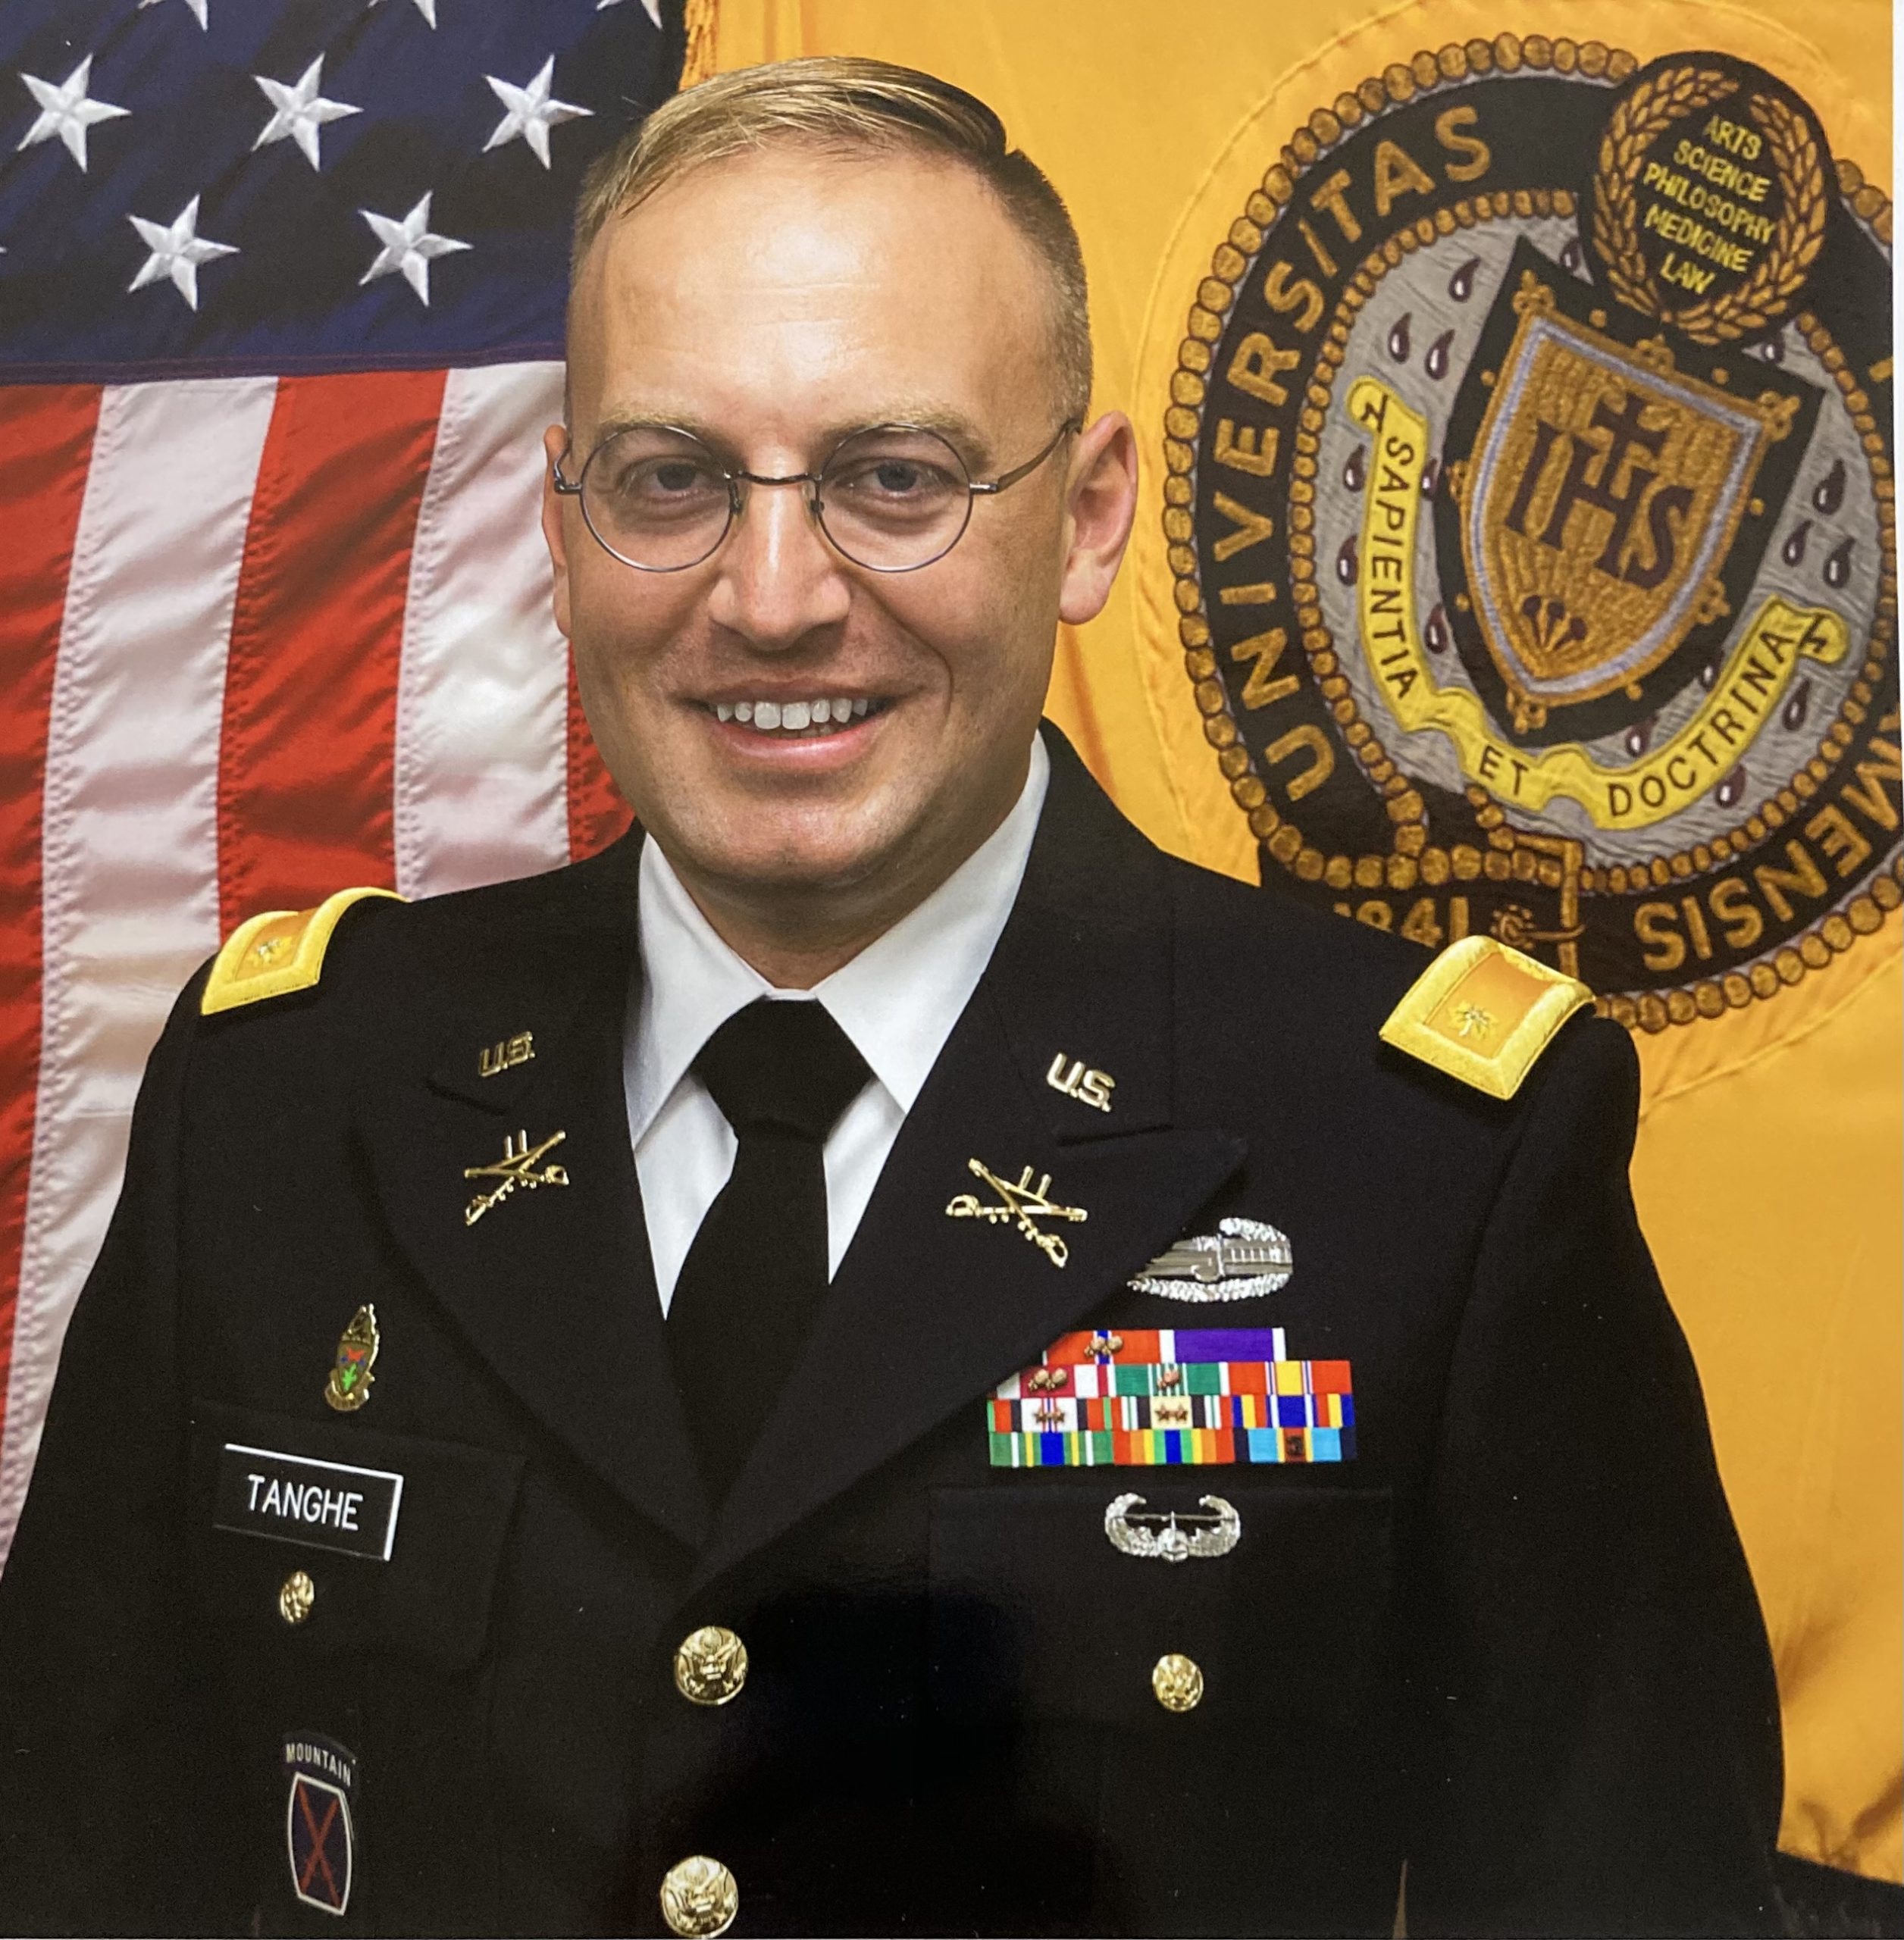 Paul Tanghe, Lieutenant Colonel, US Army